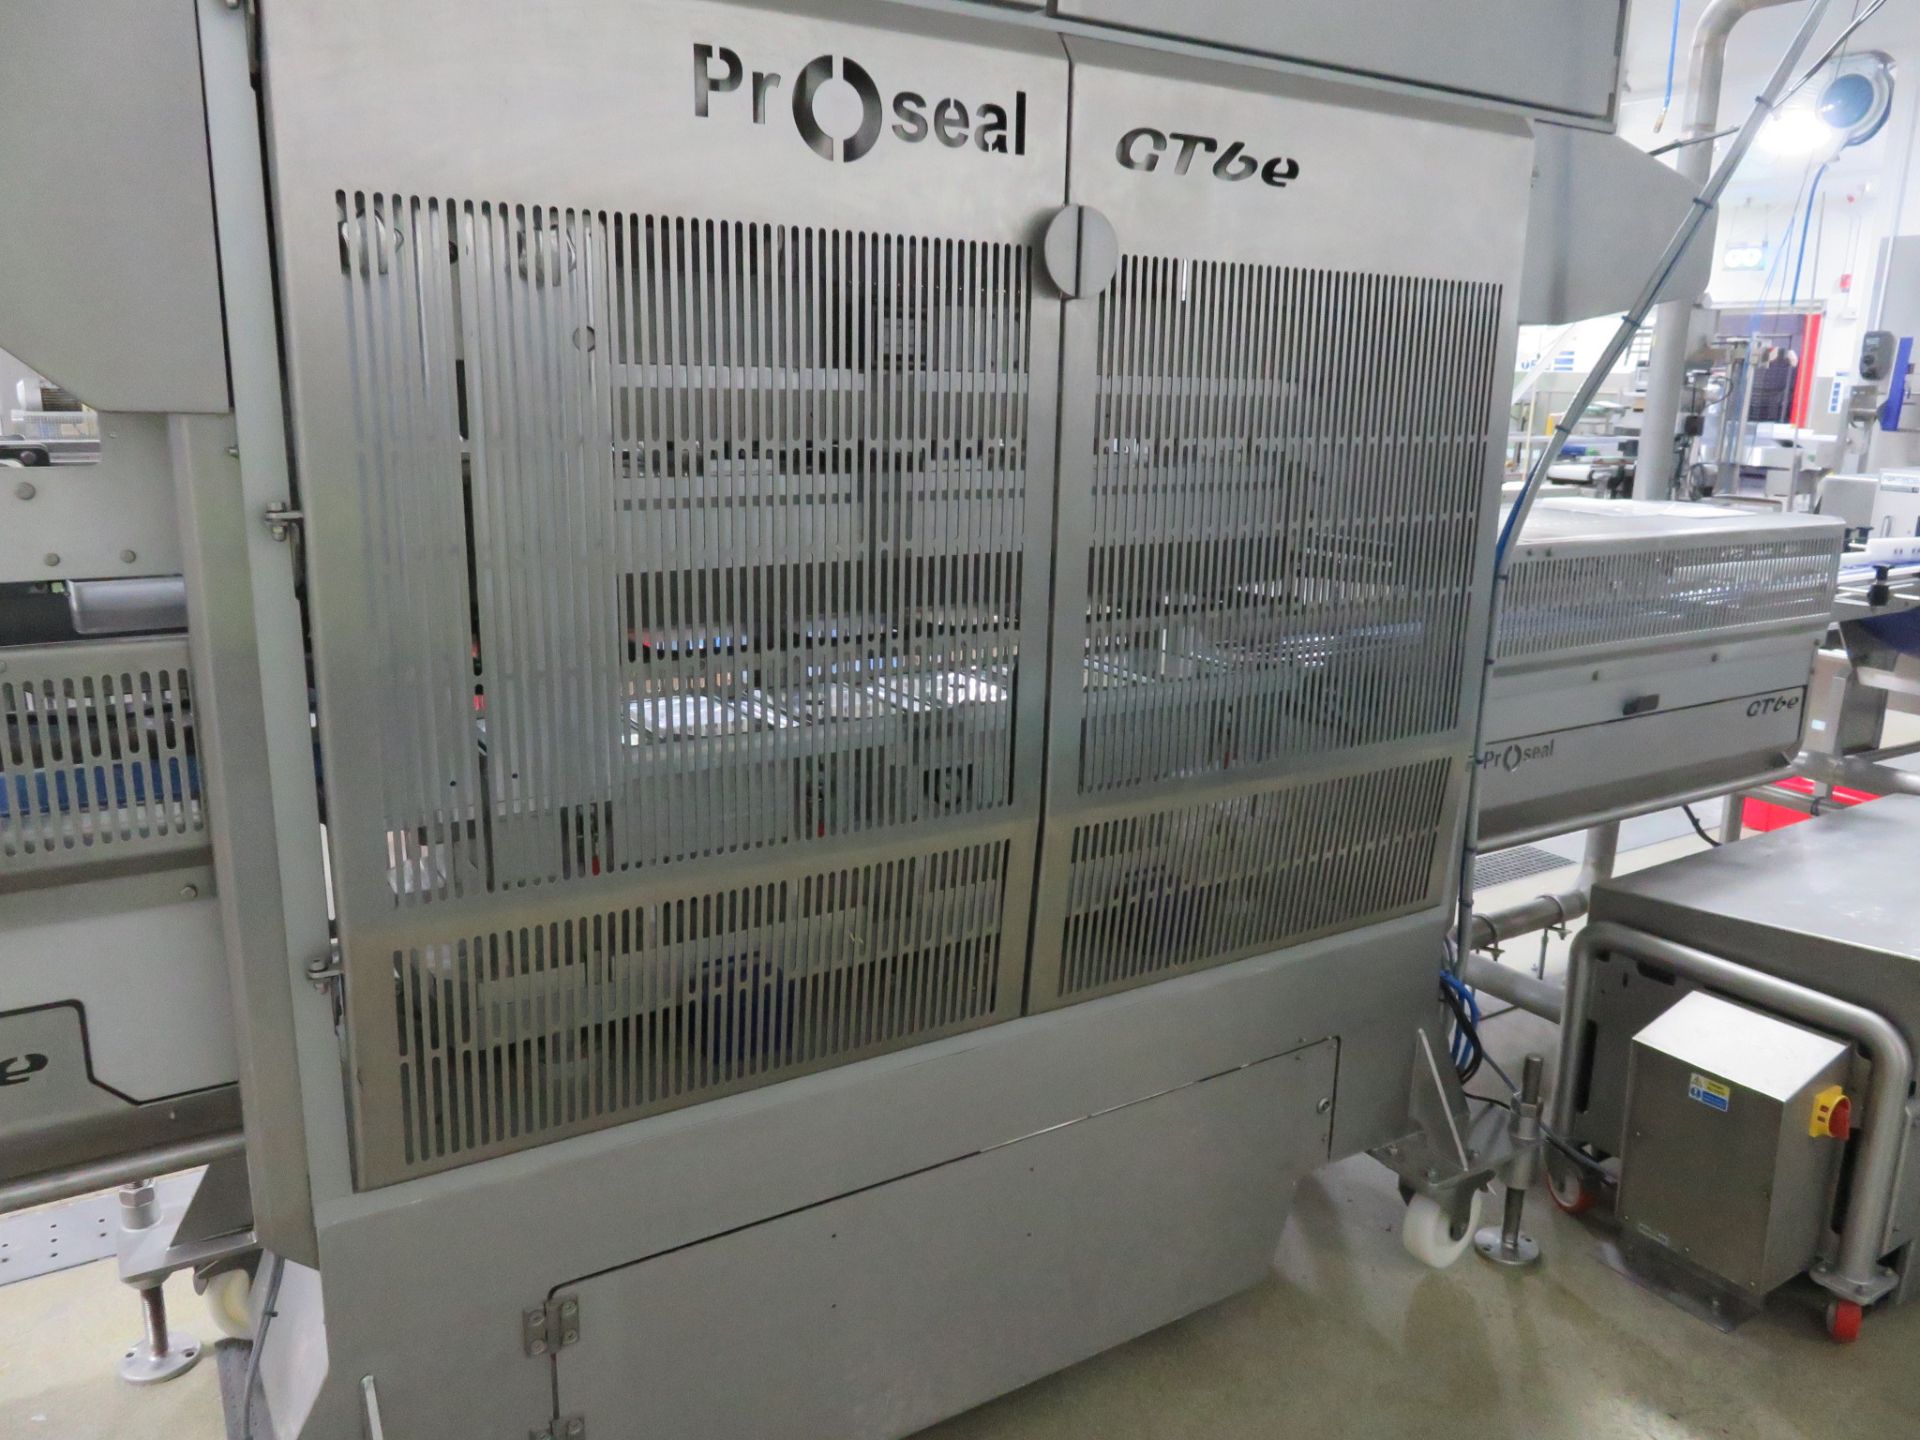 PROSEAL GT6e SKIN PLUS TRAY SEALING MACHINE - ONLY 18 MONTHS OLD. PART OF A COMBINATION LOT193. - Image 4 of 20